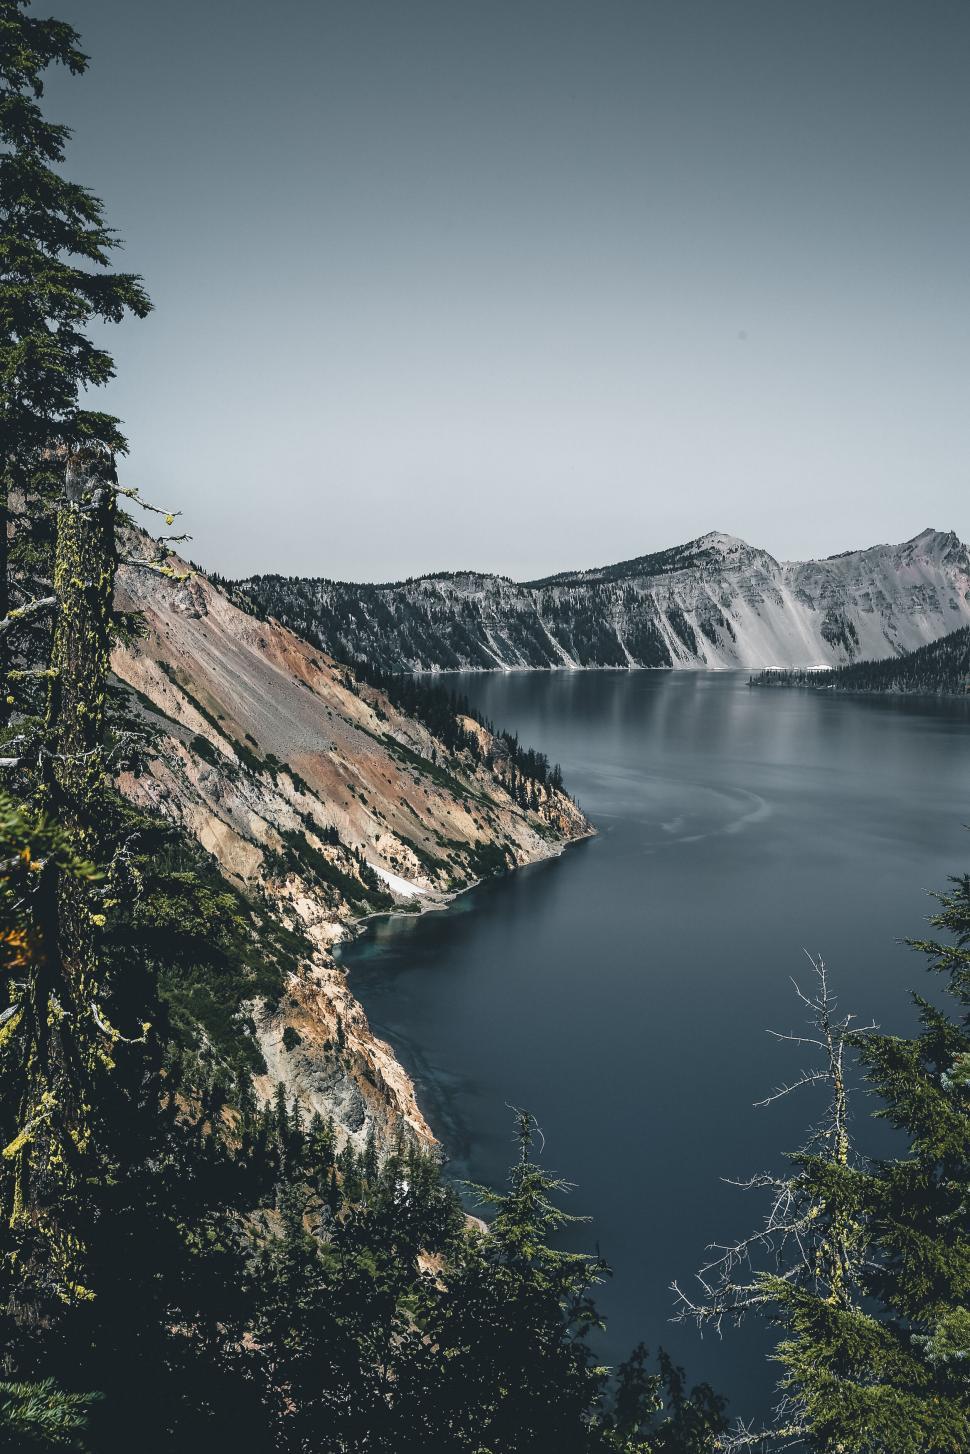 Free Image of A body of water with trees and mountains in the background 